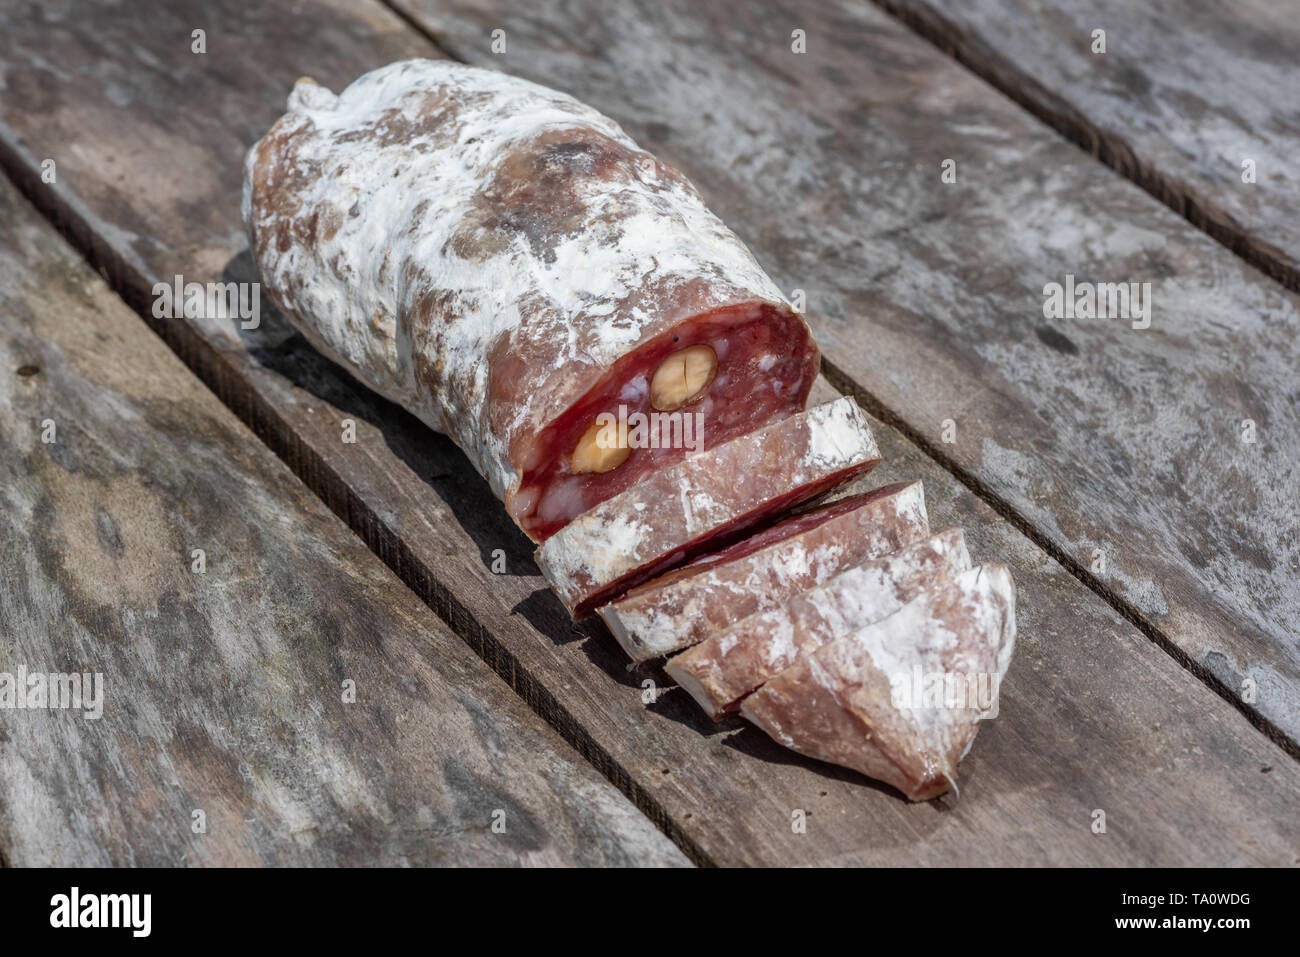 Dried sausage with nuts cut in slices close-up view on a wooden table Stock Photo